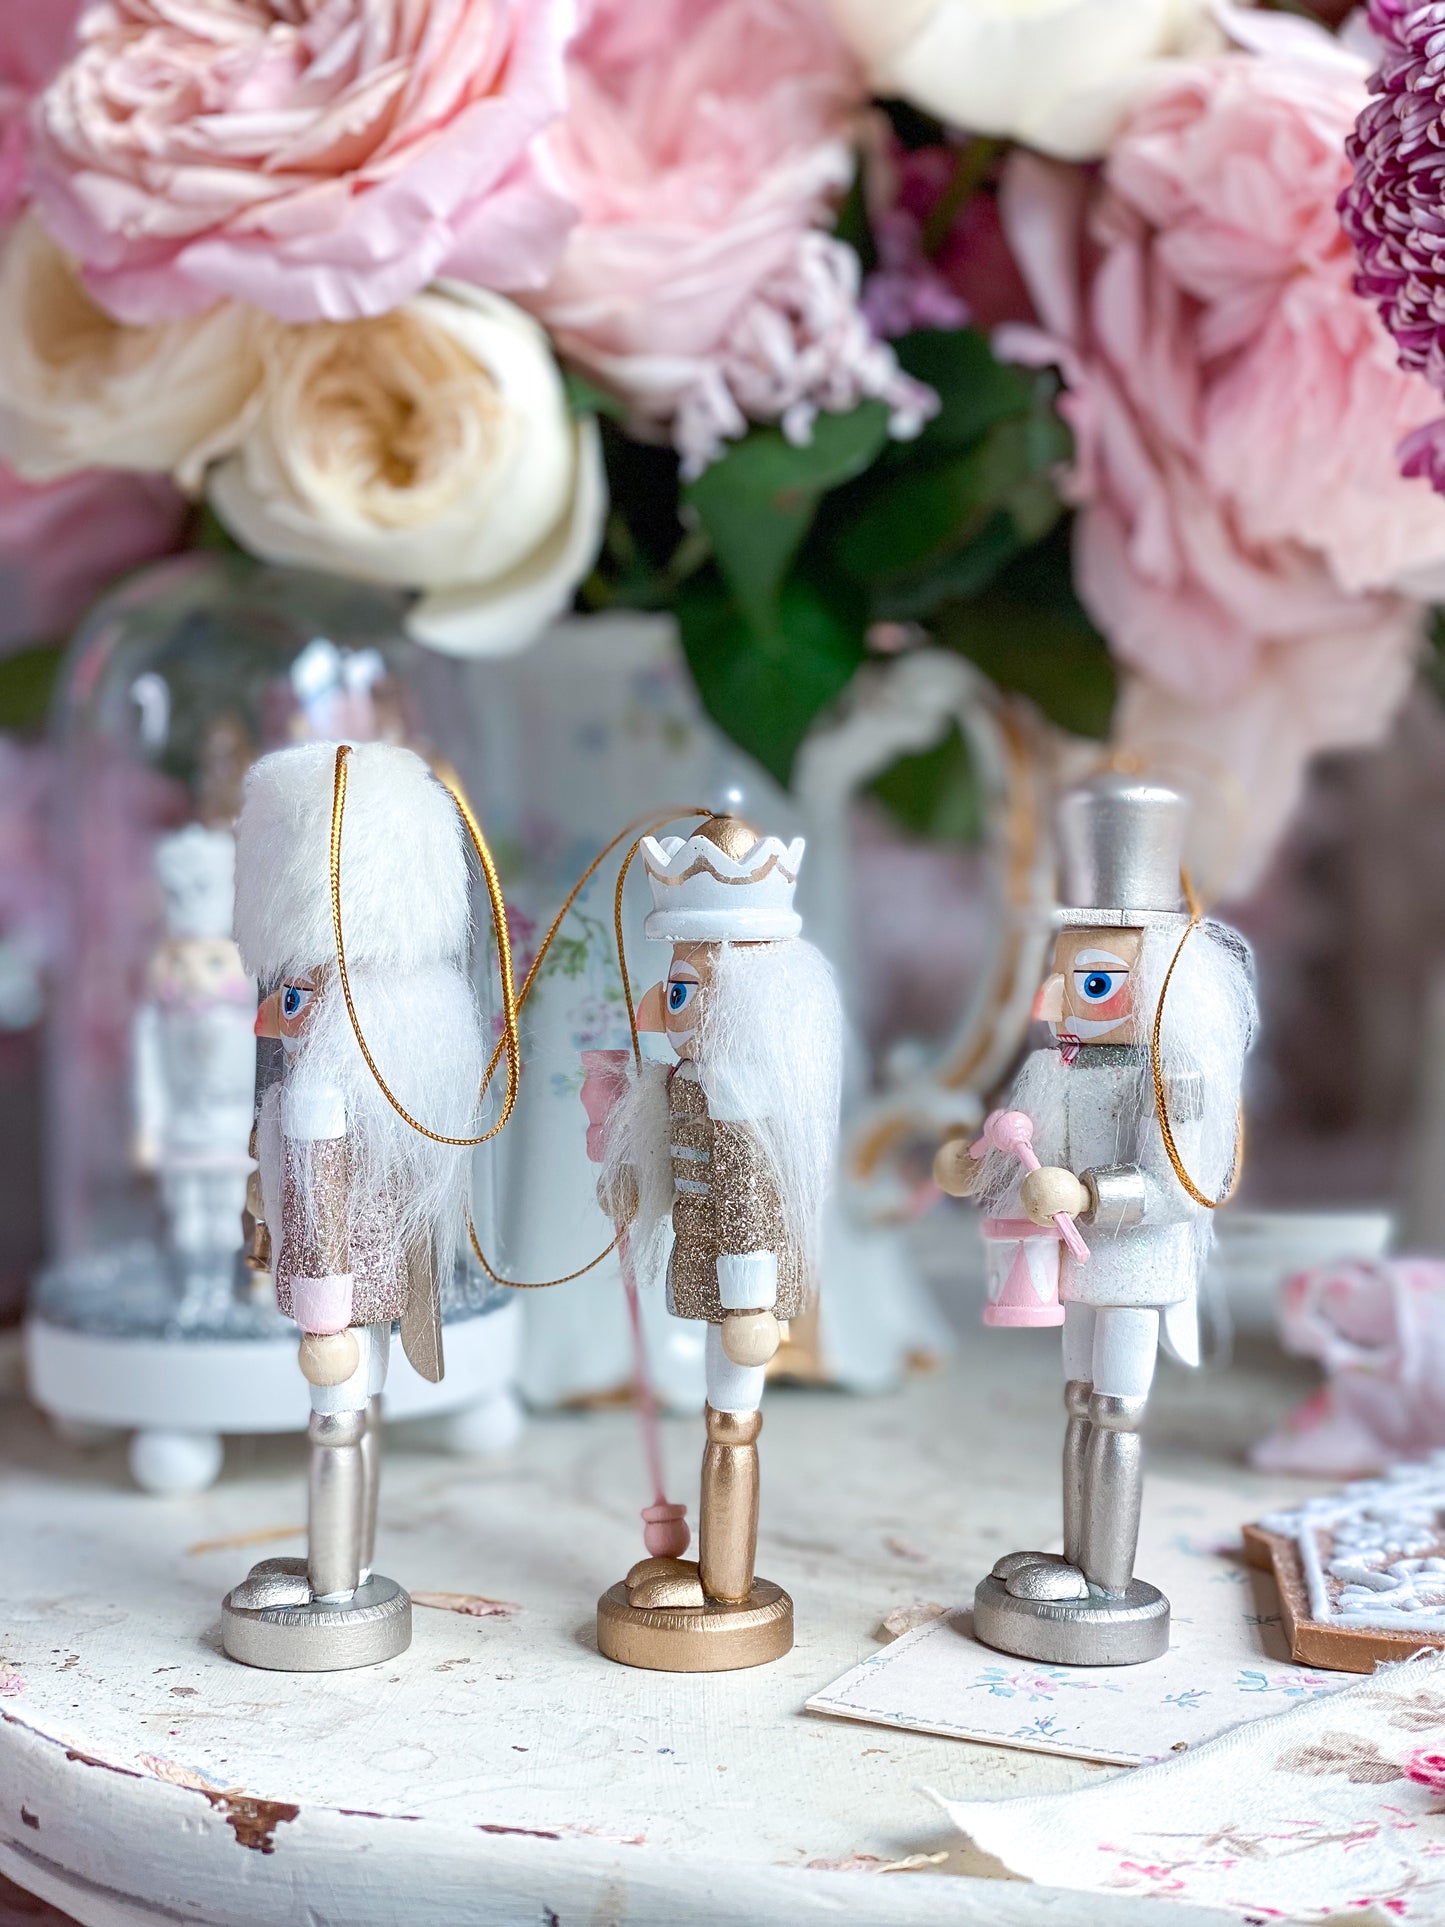 Set of 3 Rose Gold and Pink Nutcracker Ornaments